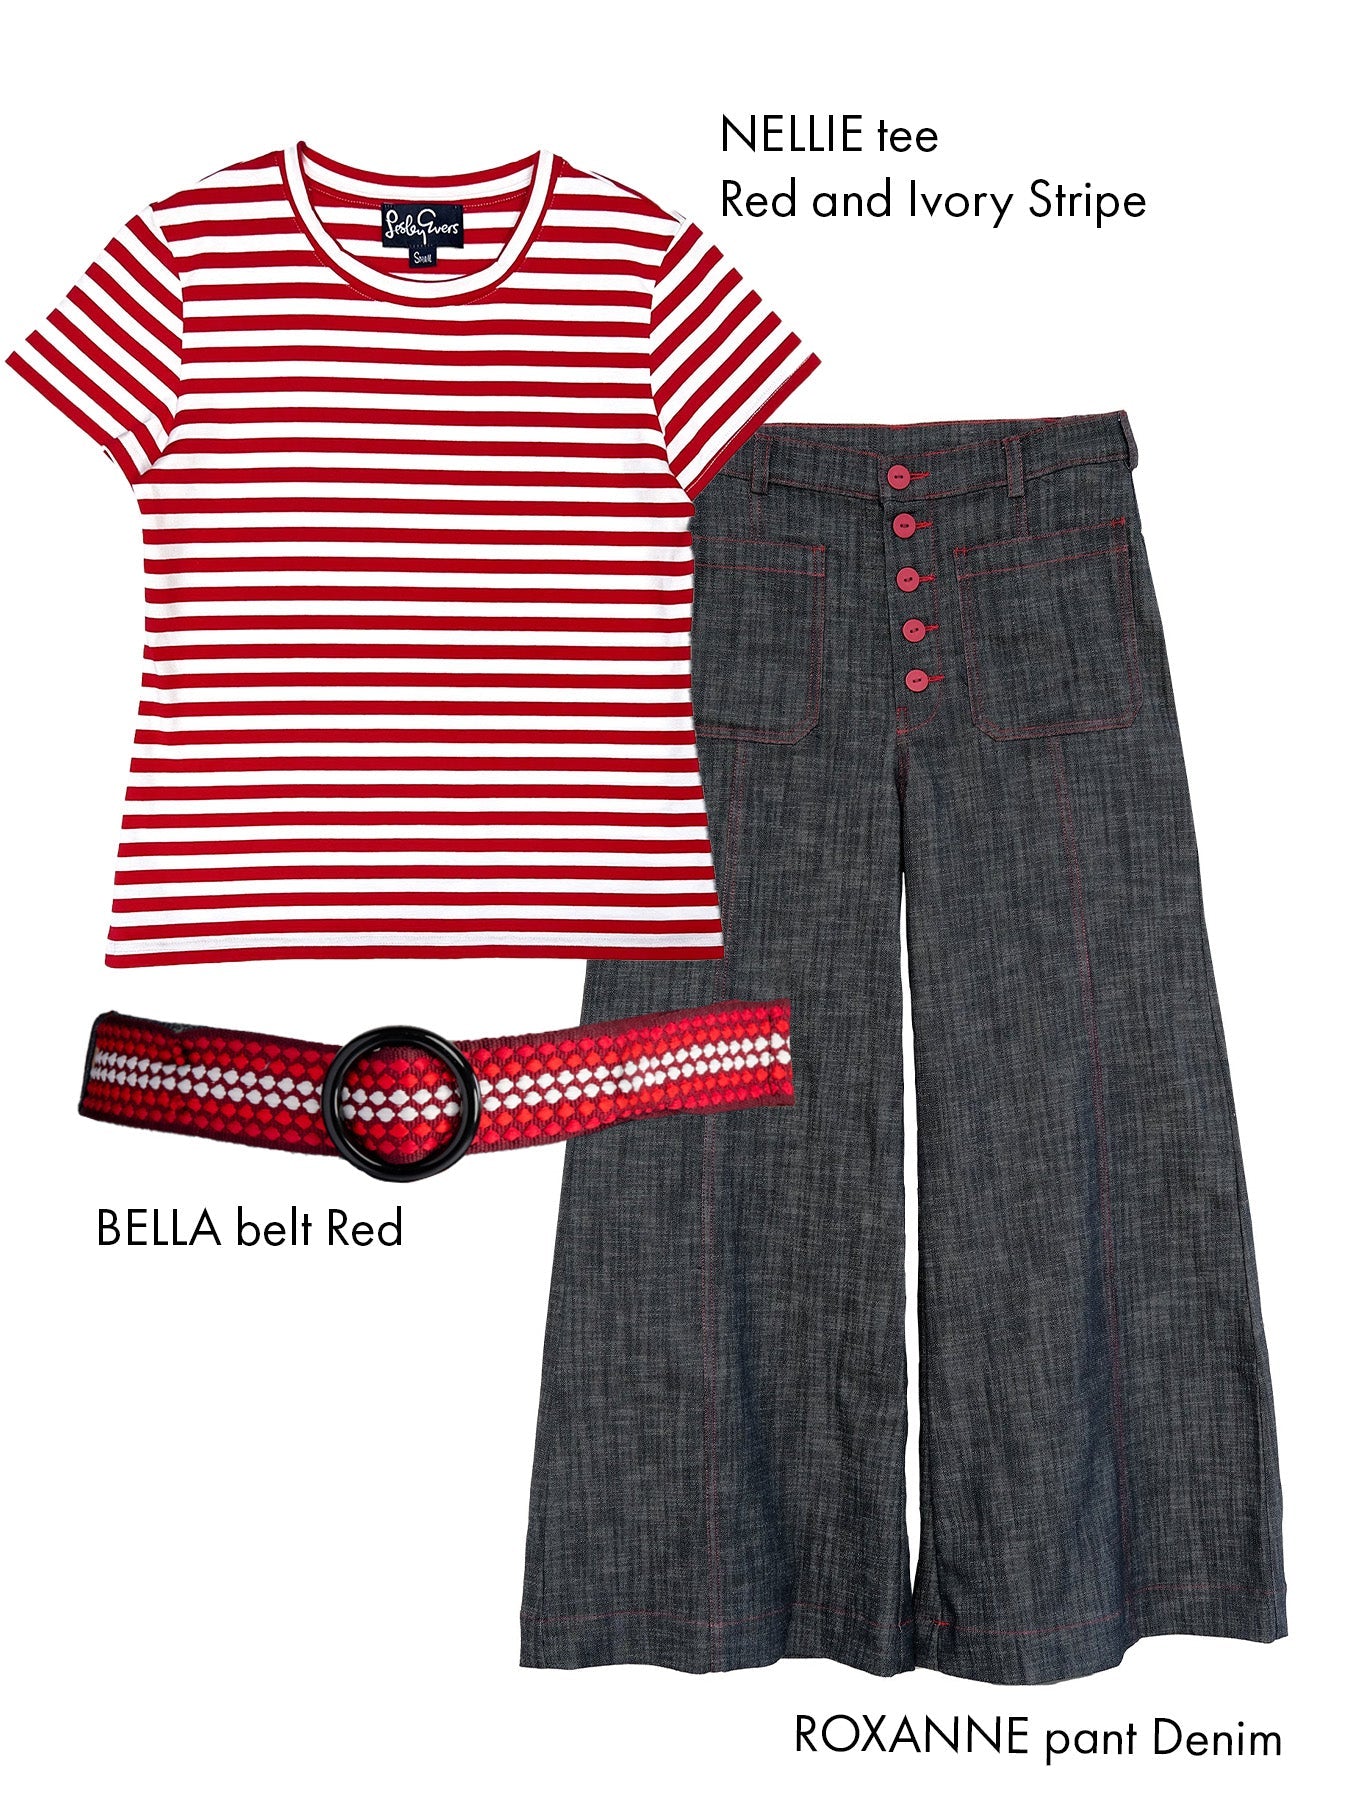 NELLIE tee Red and Ivory Stripe - Lesley Evers-nellie-Shop-Shop/All Products